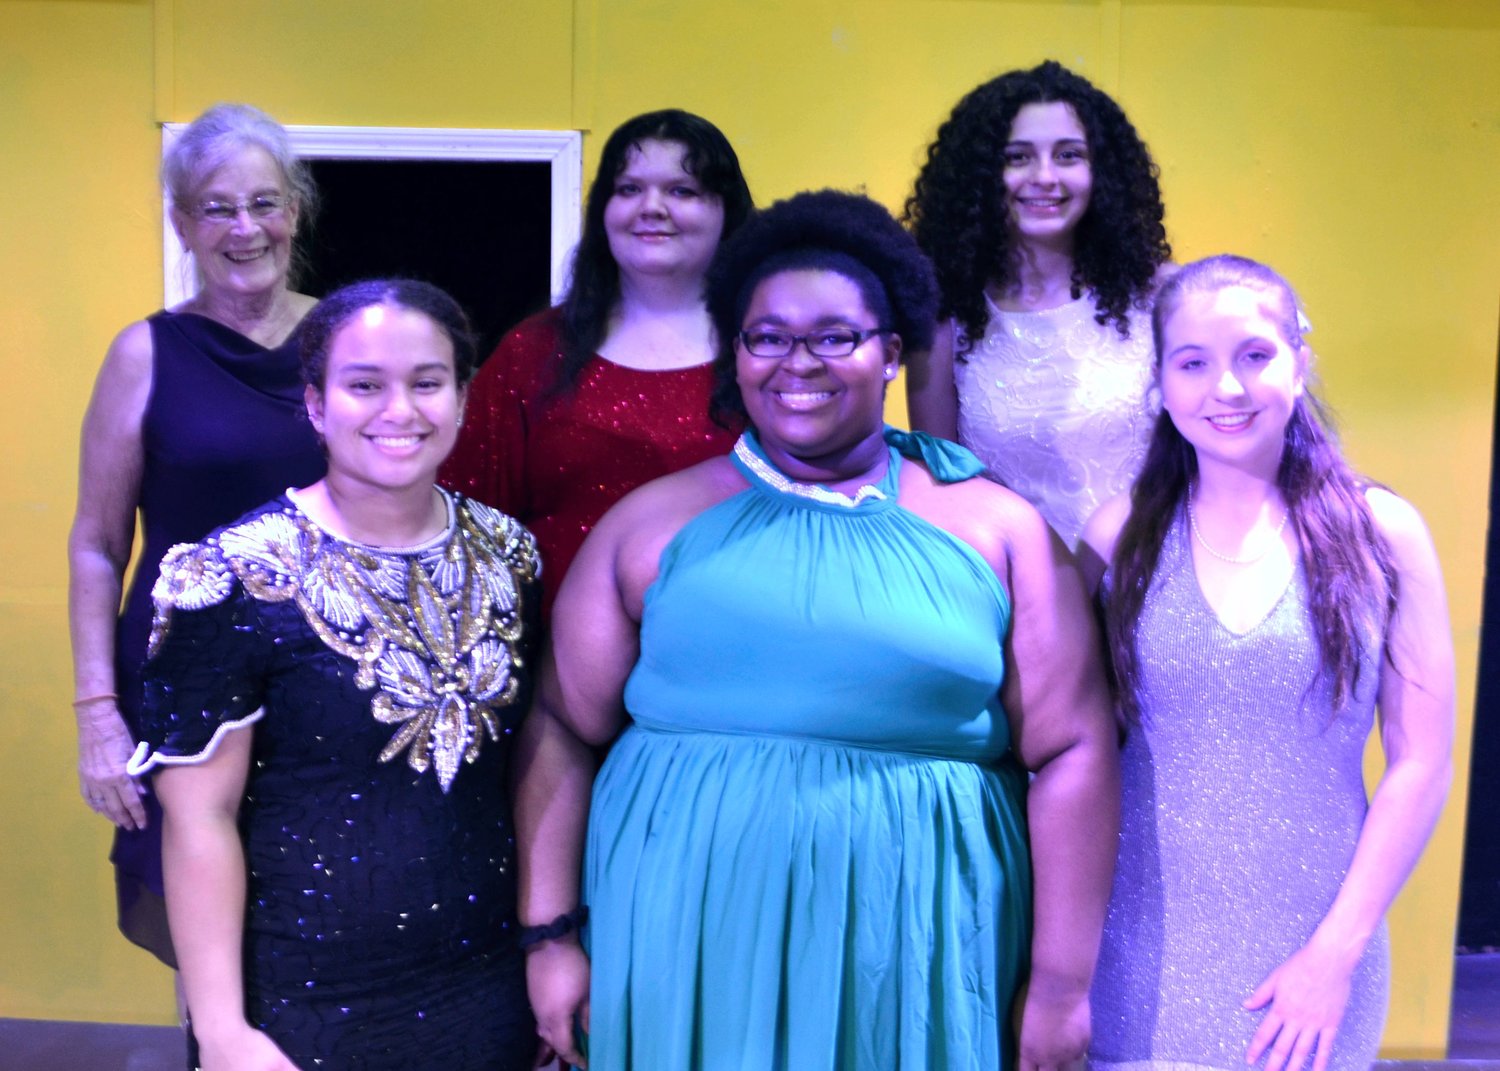 Pictured in the back row from left to right are: Sue Wild, Emylee Hull, and Naima Mailliard. Front row from left to right are: Jenny McClain, Kyla Miller, and Jackie Wilkins.